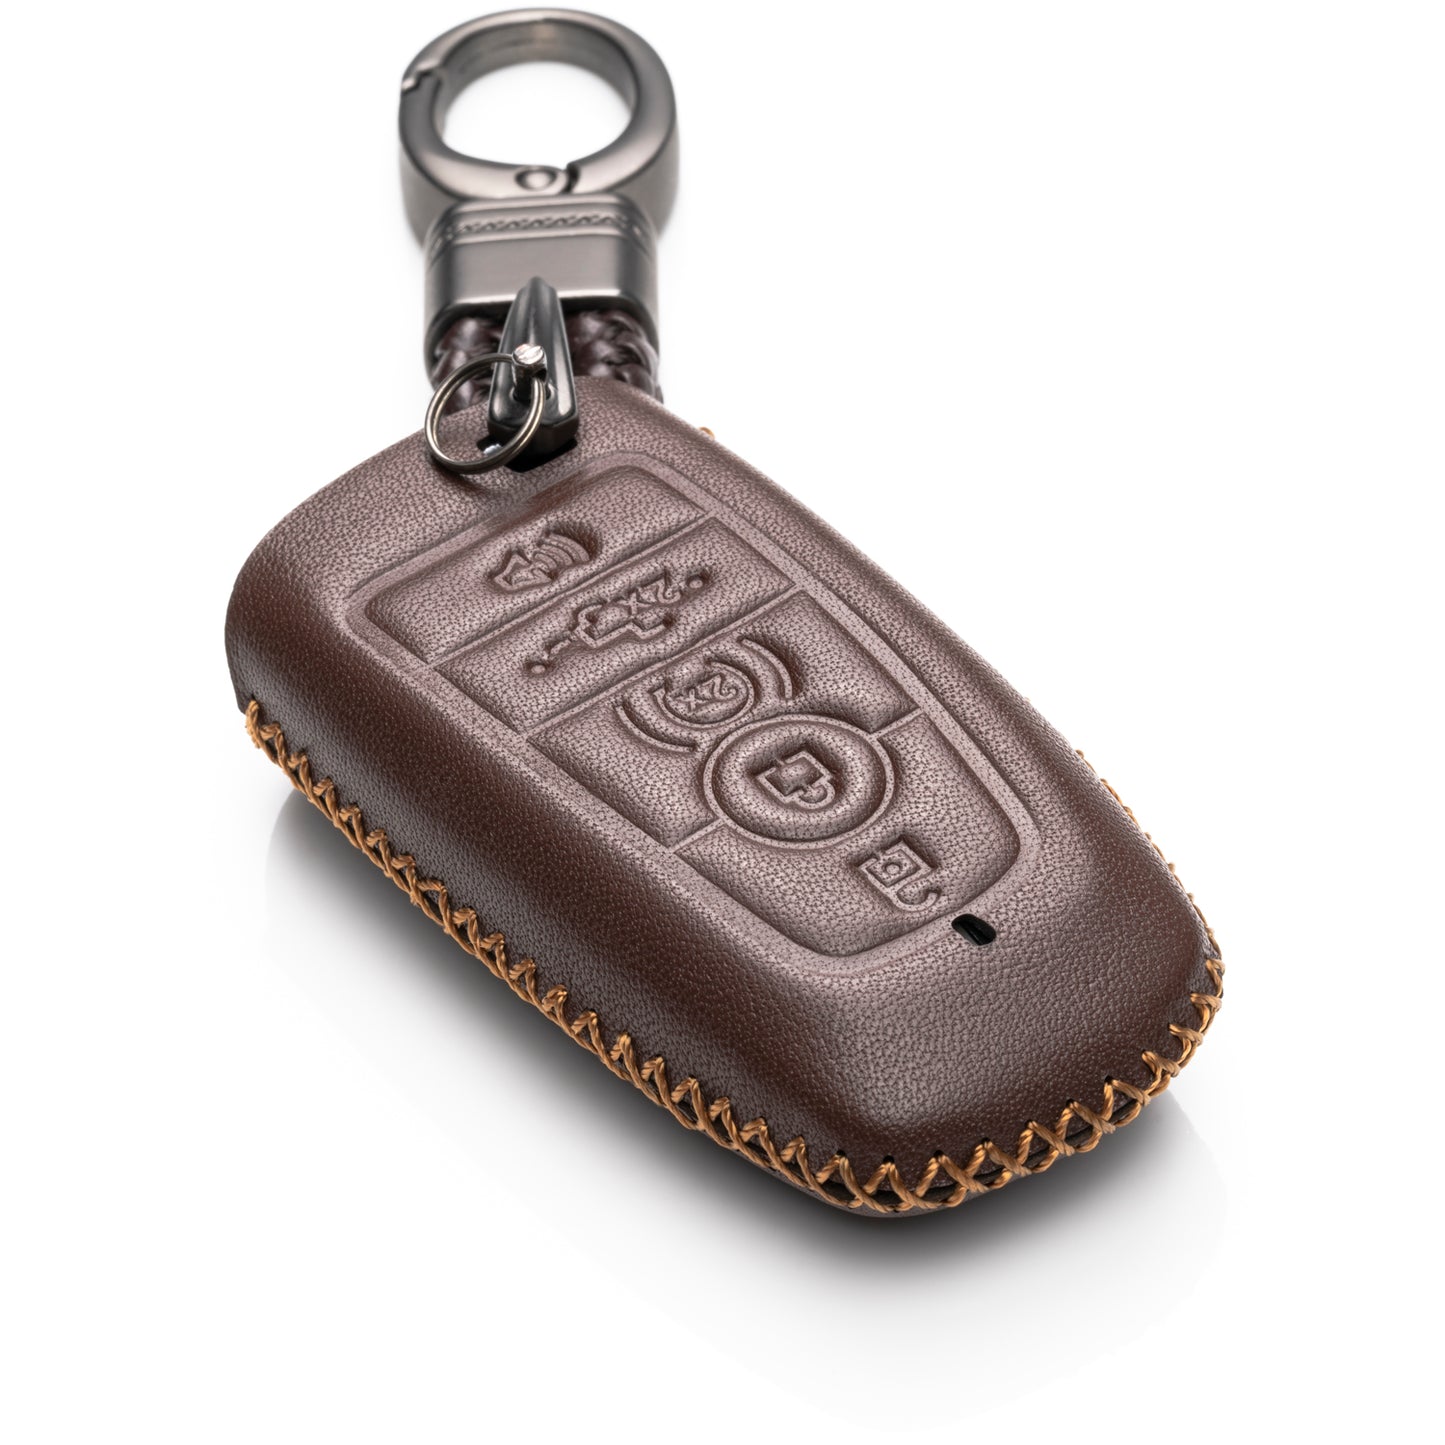 Vitodeco 5-Button Leather Smart Key Fob Case Compatible with Ford Escape 2024, Bronco 2024, Explorer 2024, Edge 2024, Expedition 2024, F-150, Mustang 2024, F150 2024 and More Models